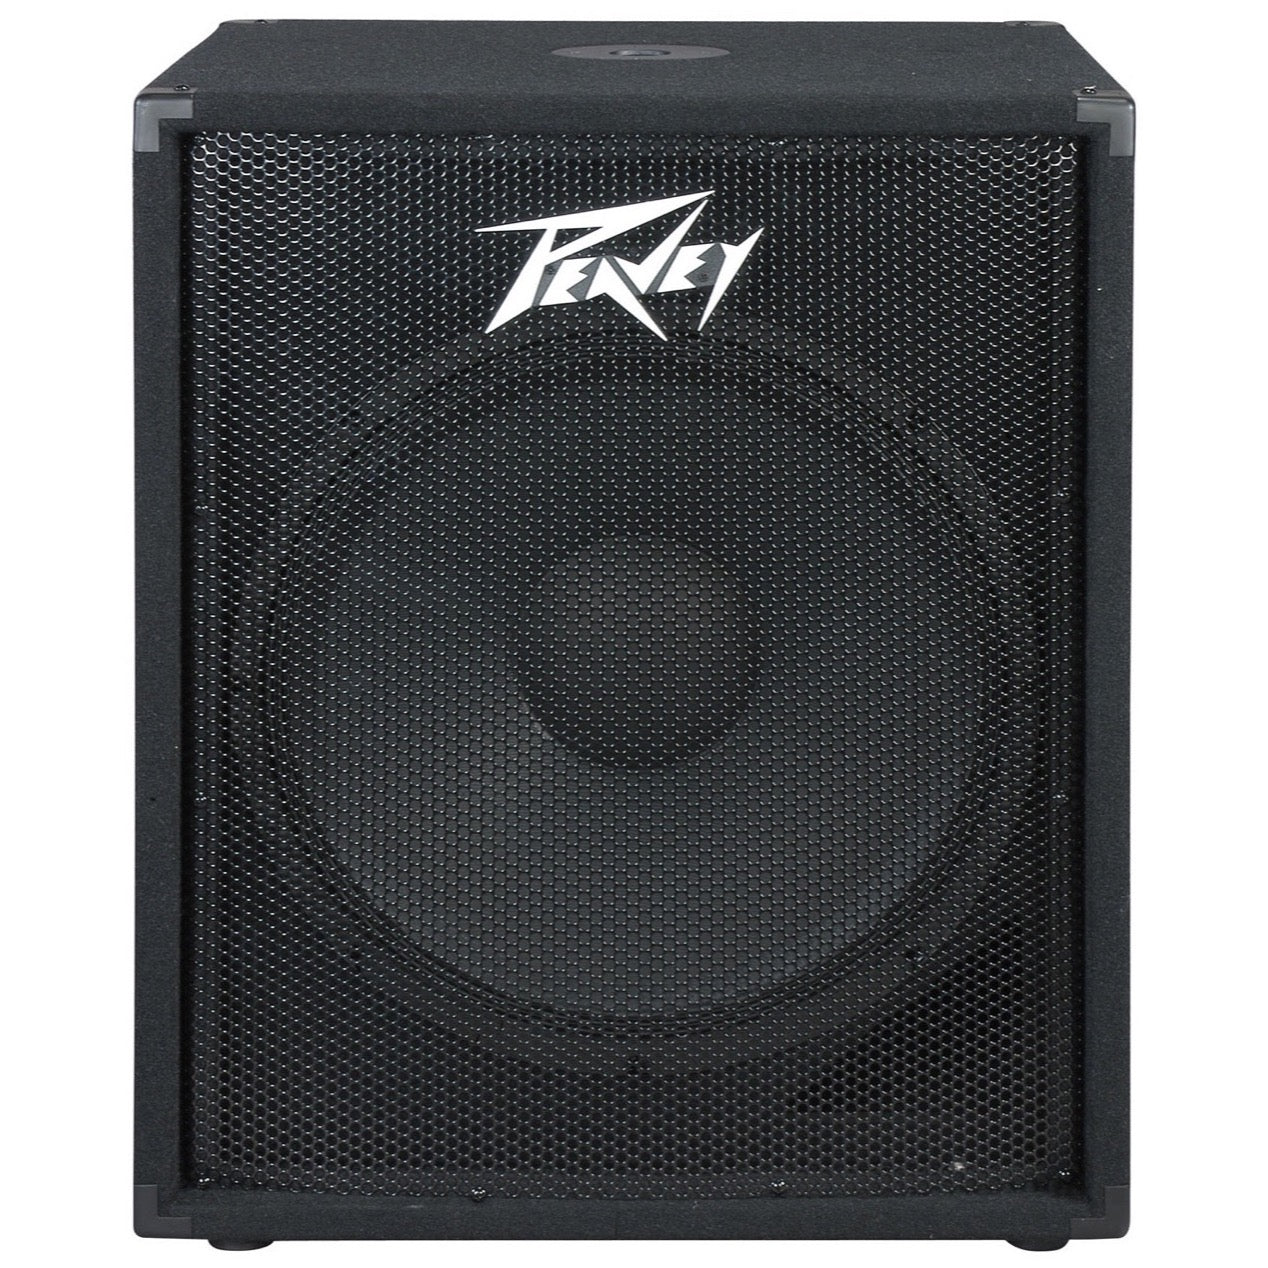 Peavey PV118 Passive, Unpowered Subwoofer (1x18 Inch), Pair